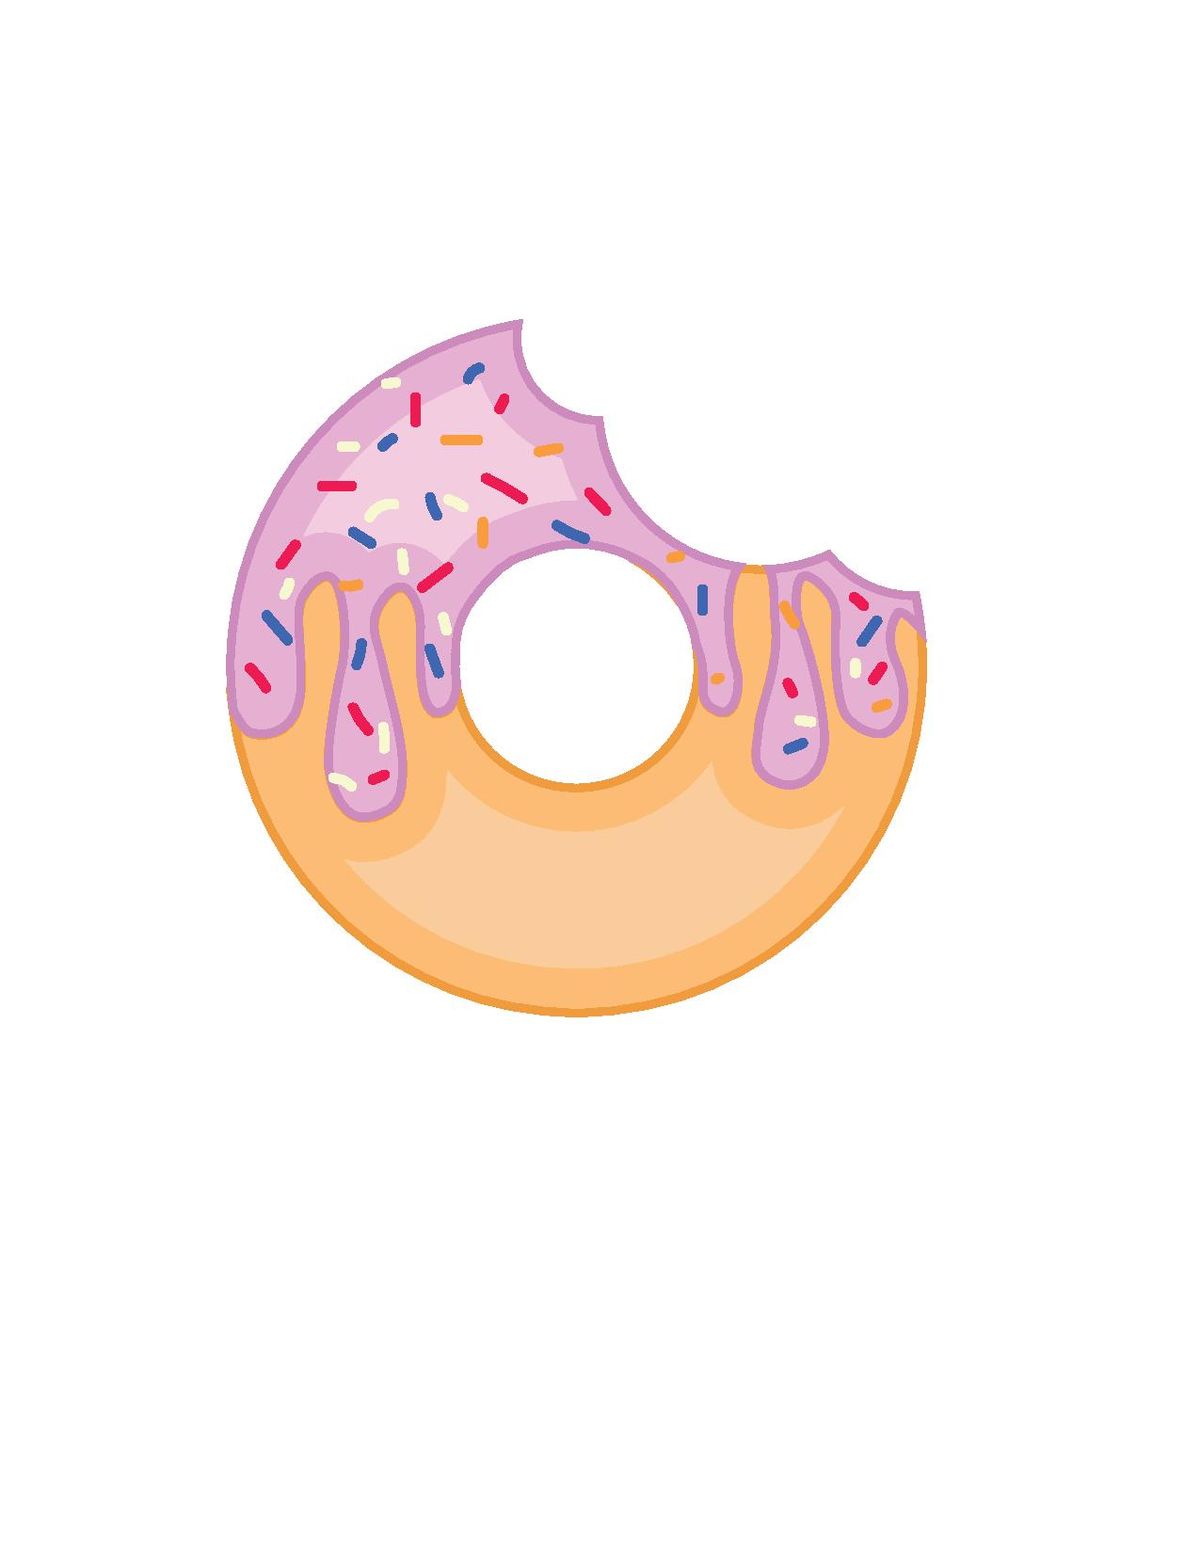 How To Draw A Donut With Adobe Illustrator